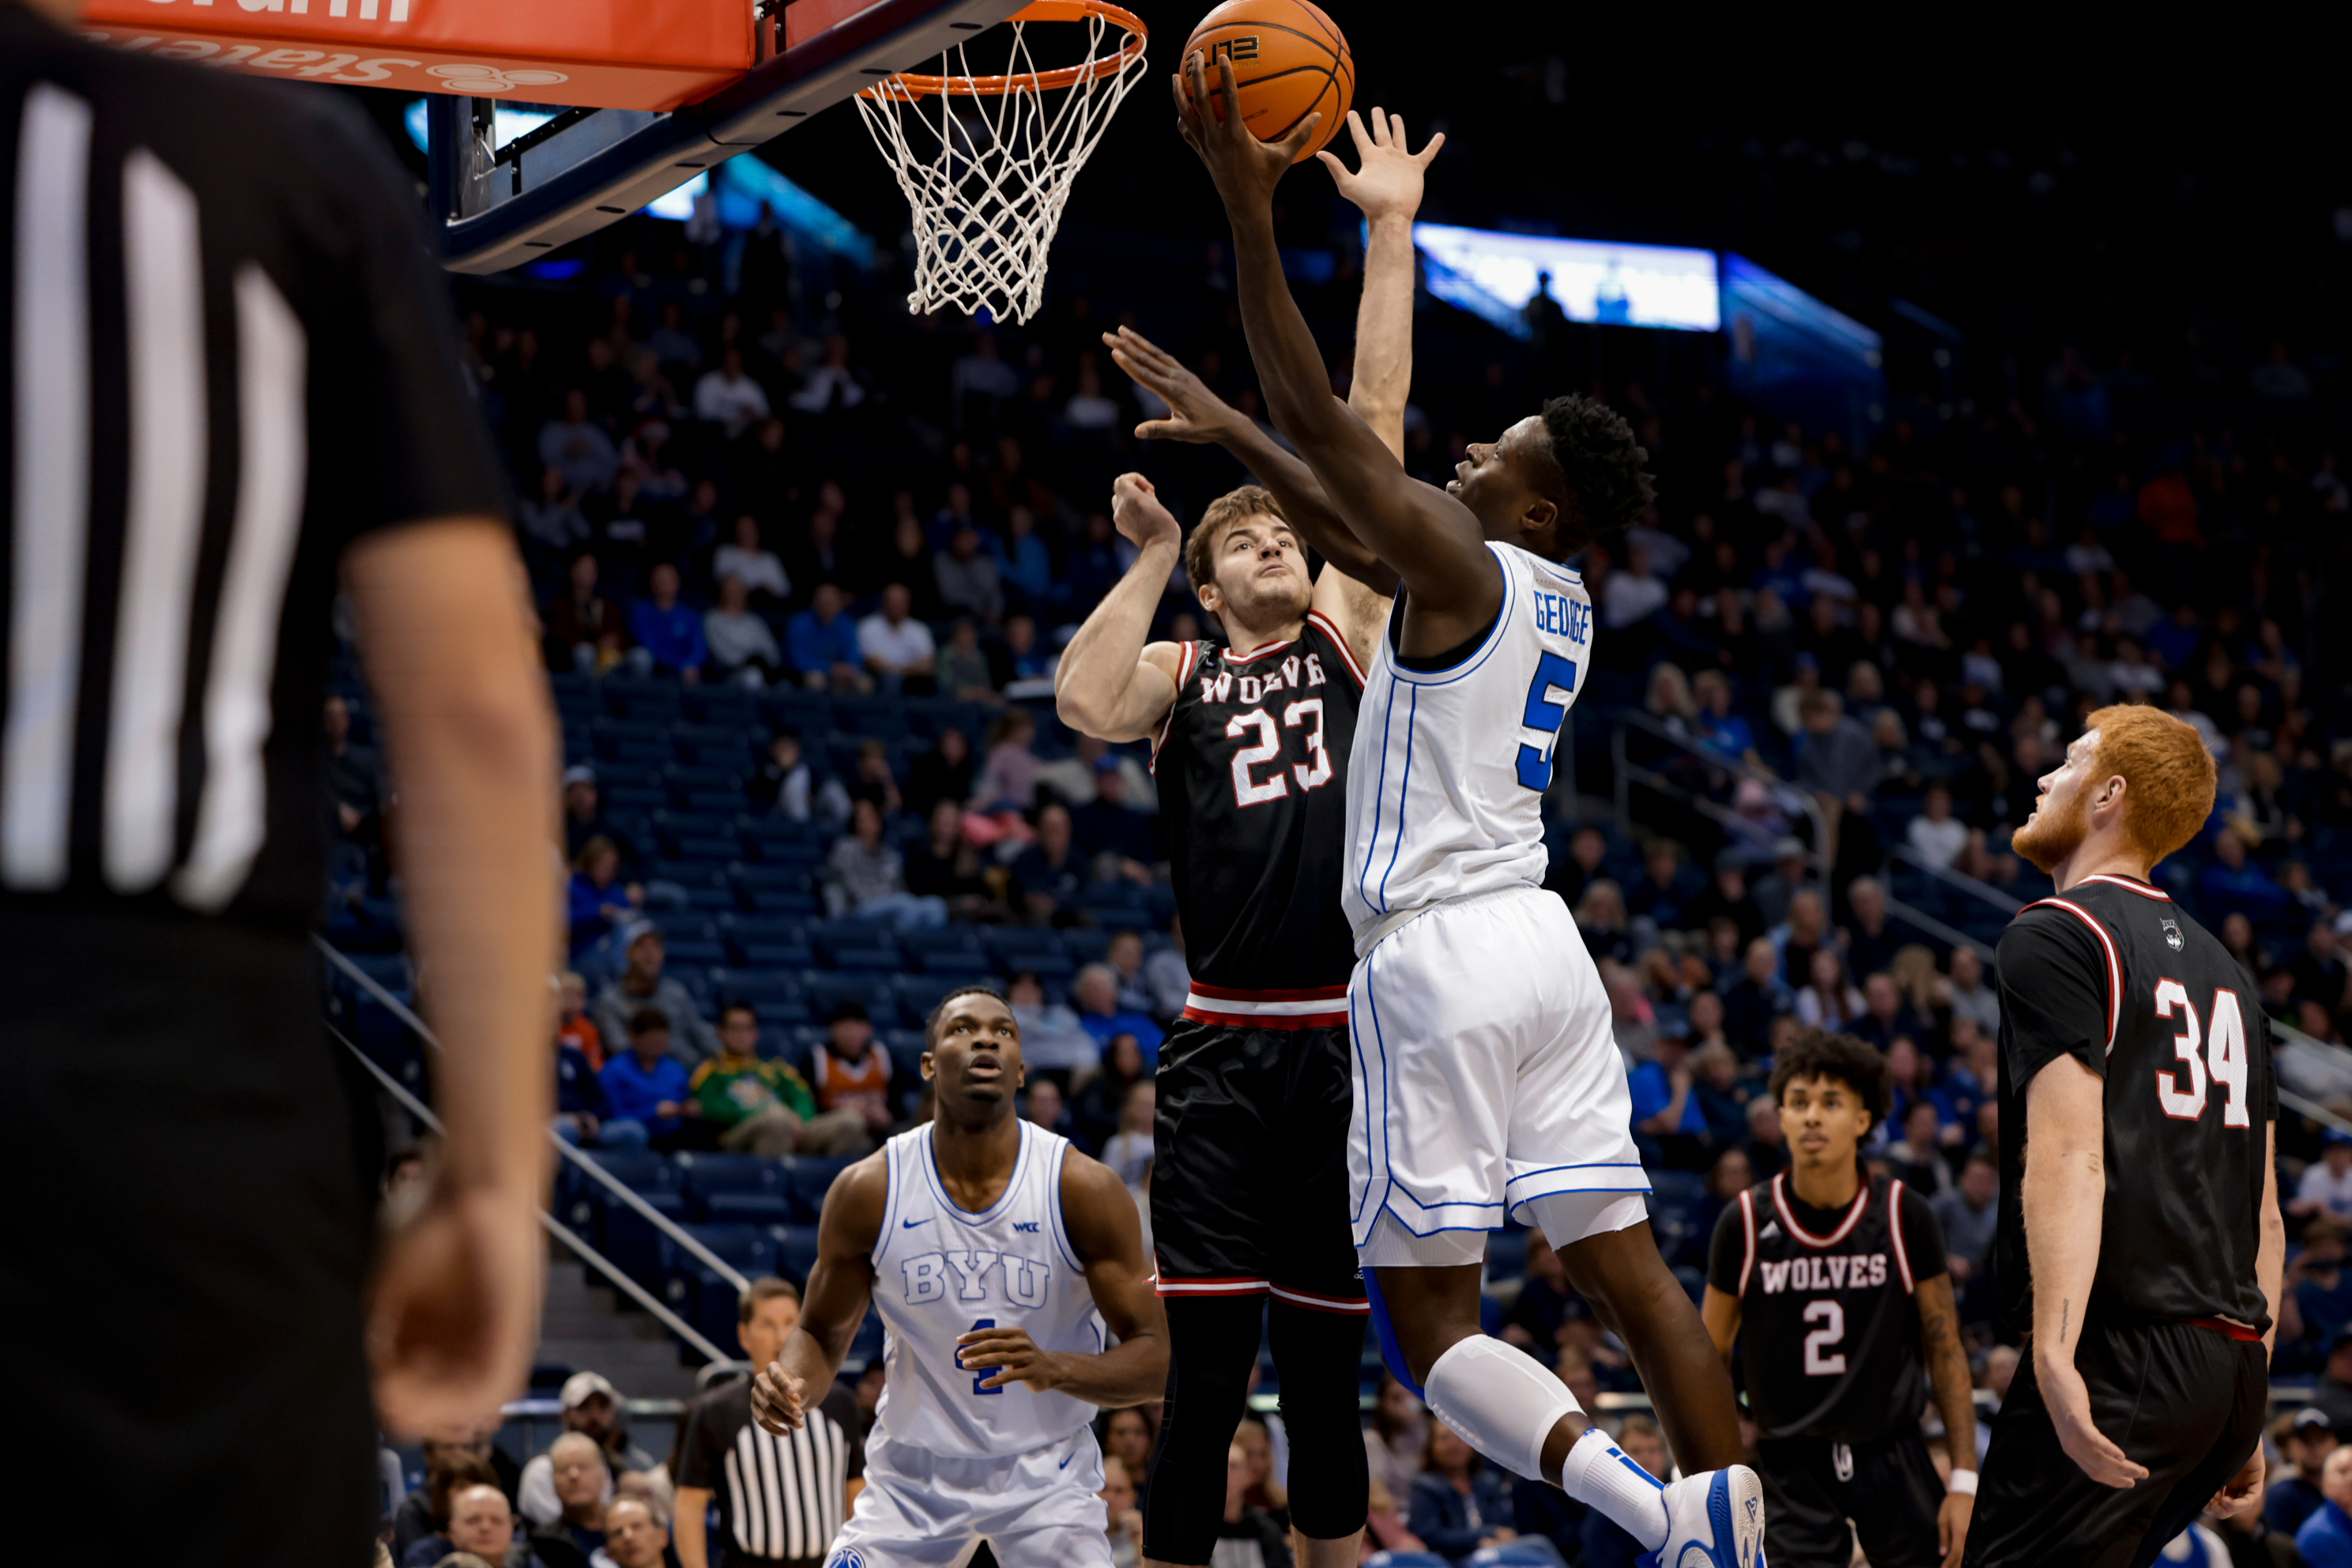 Gideon George lays it up during a game against Western Oregon at the Marriott Center.